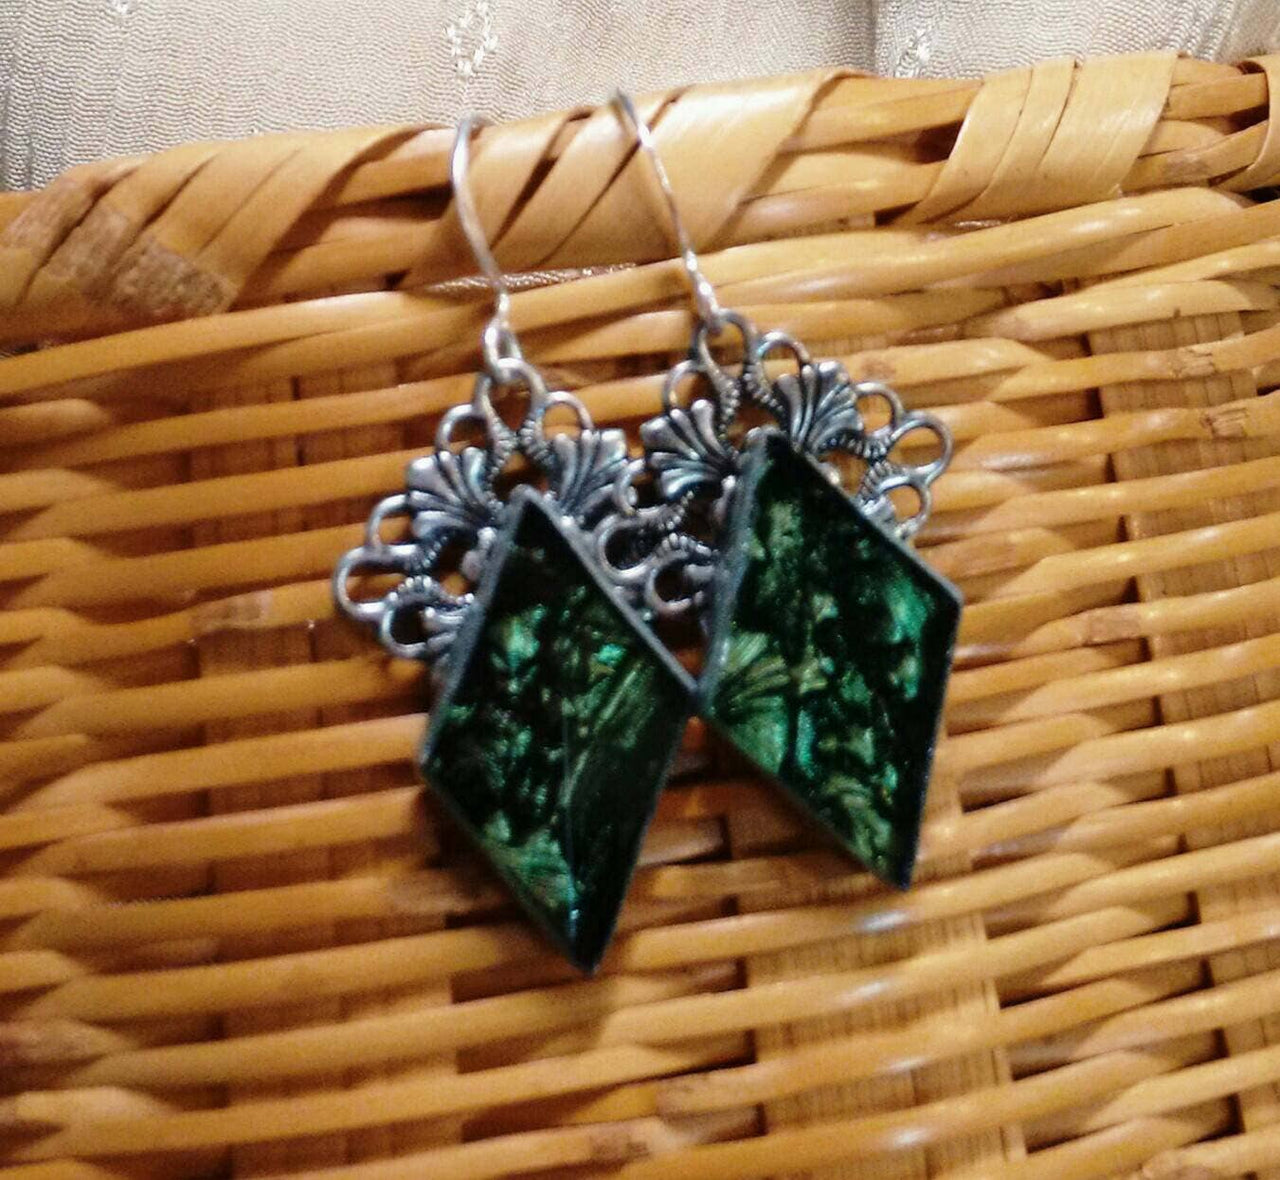 Sage green Van Gogh stained glass earrings